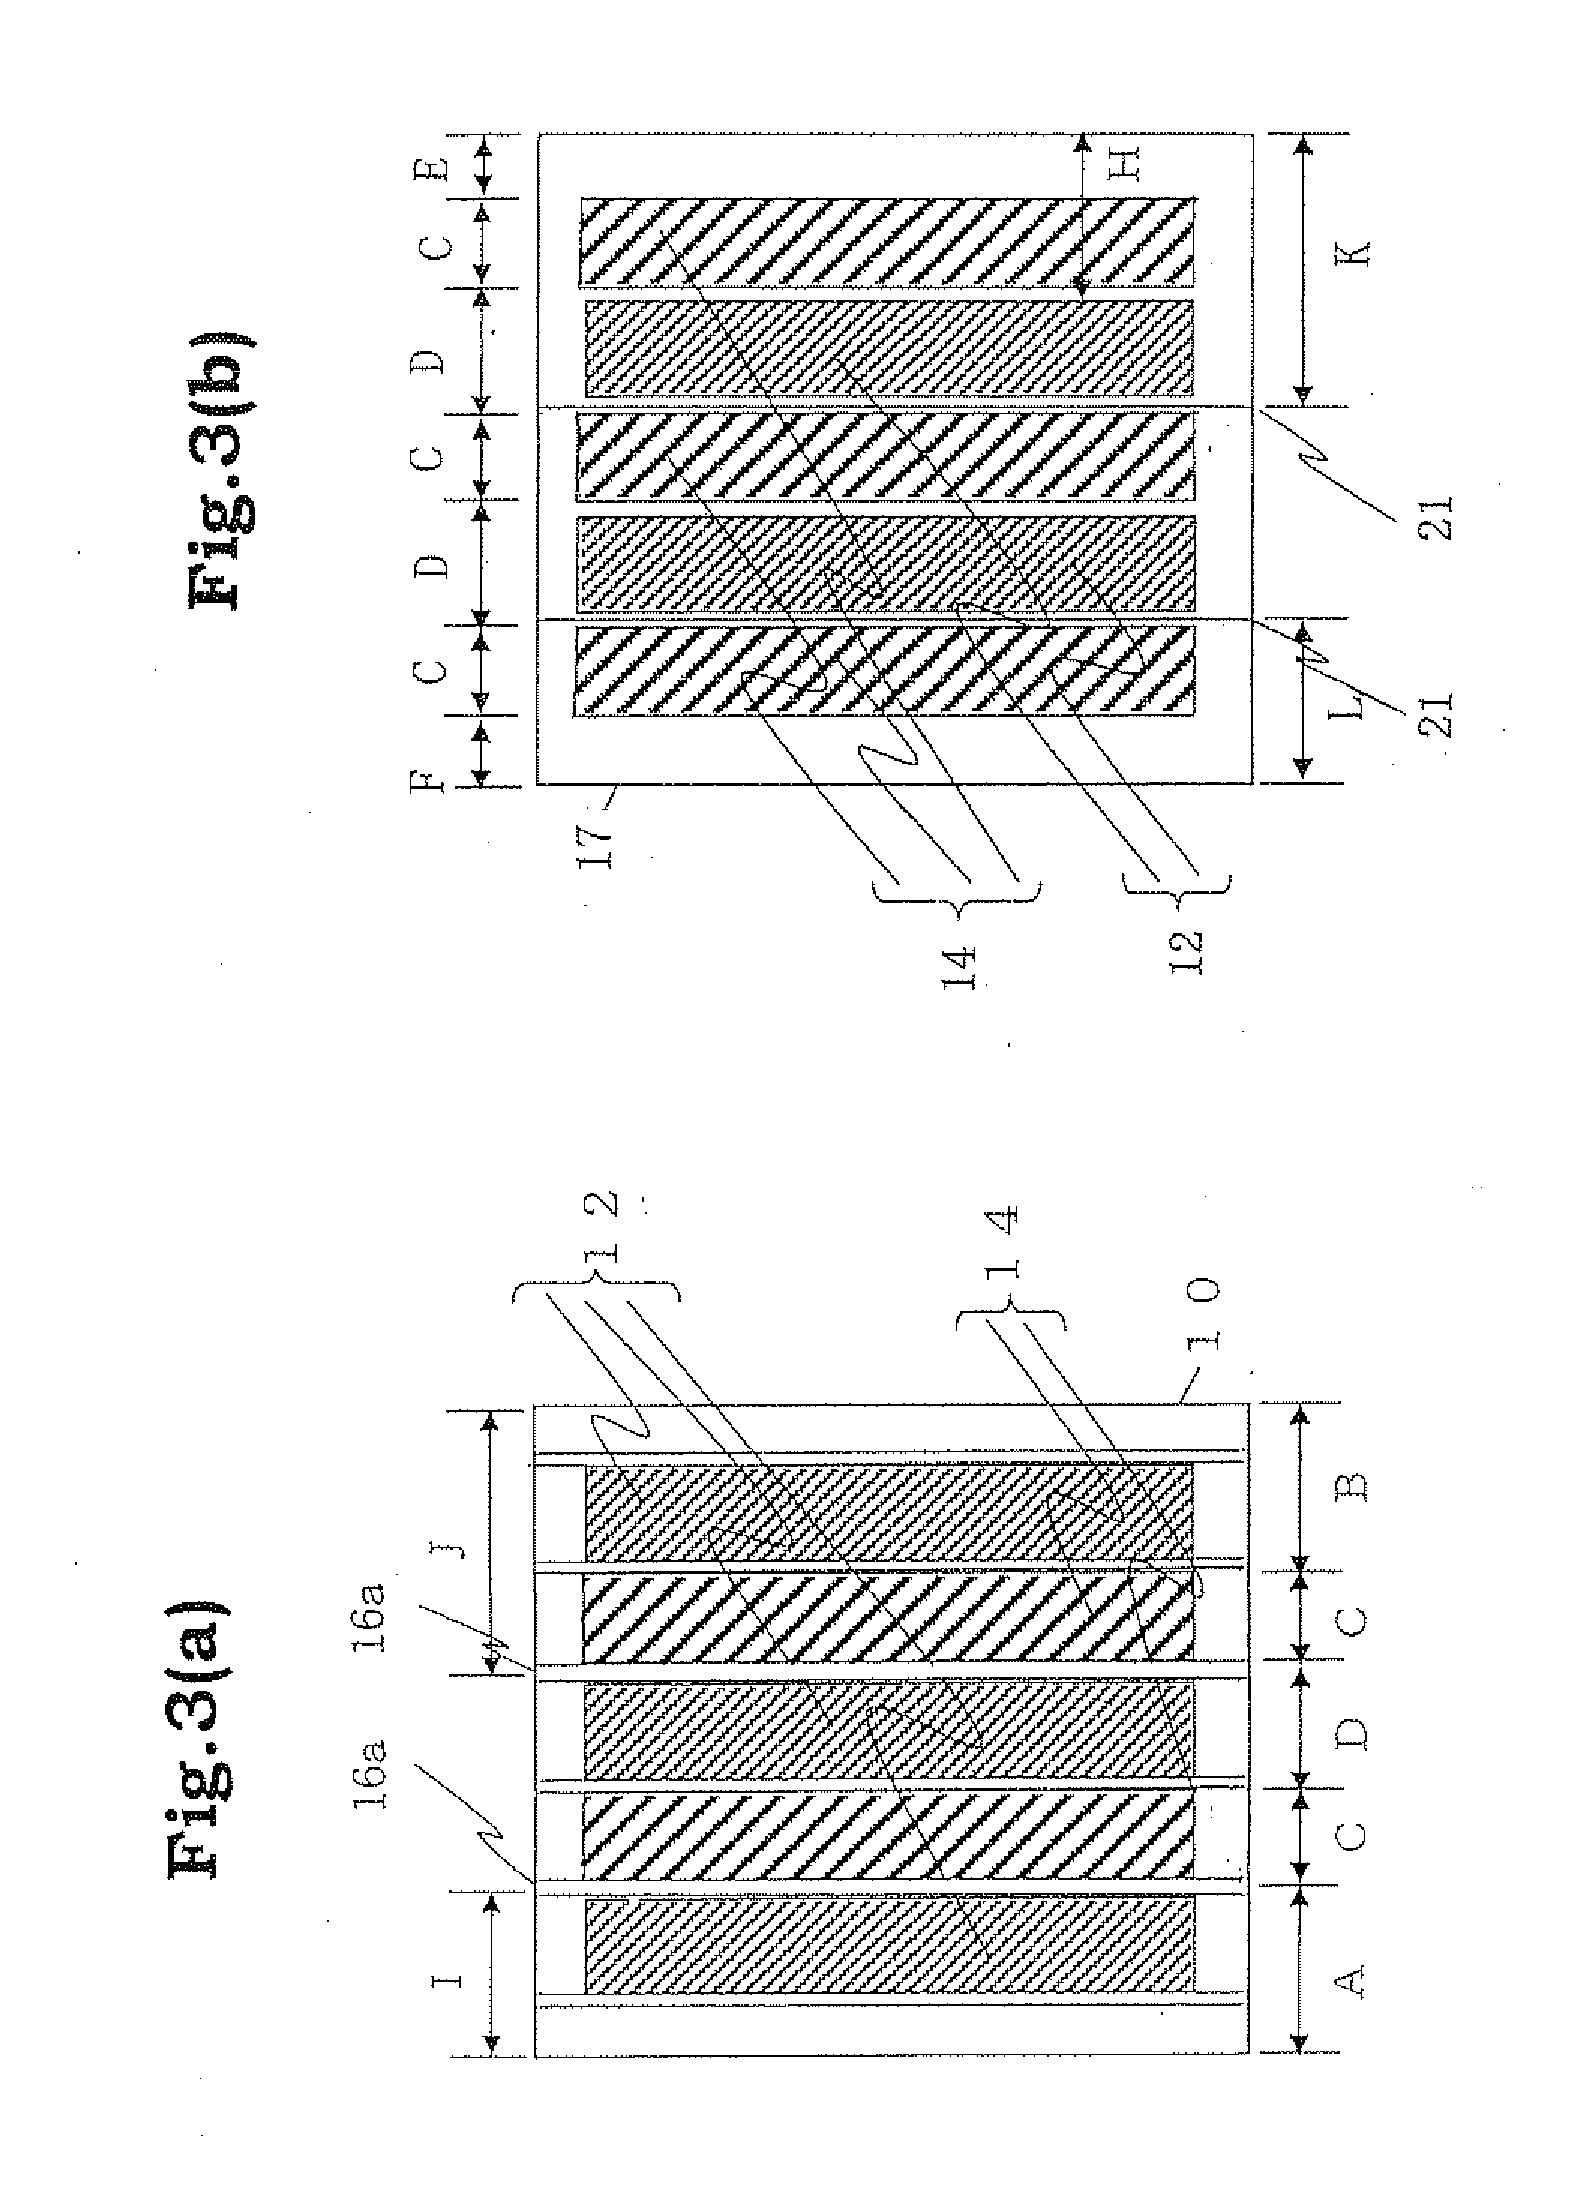 Dye-sensitized solar cell module and method of manufacturing the same (as amended)